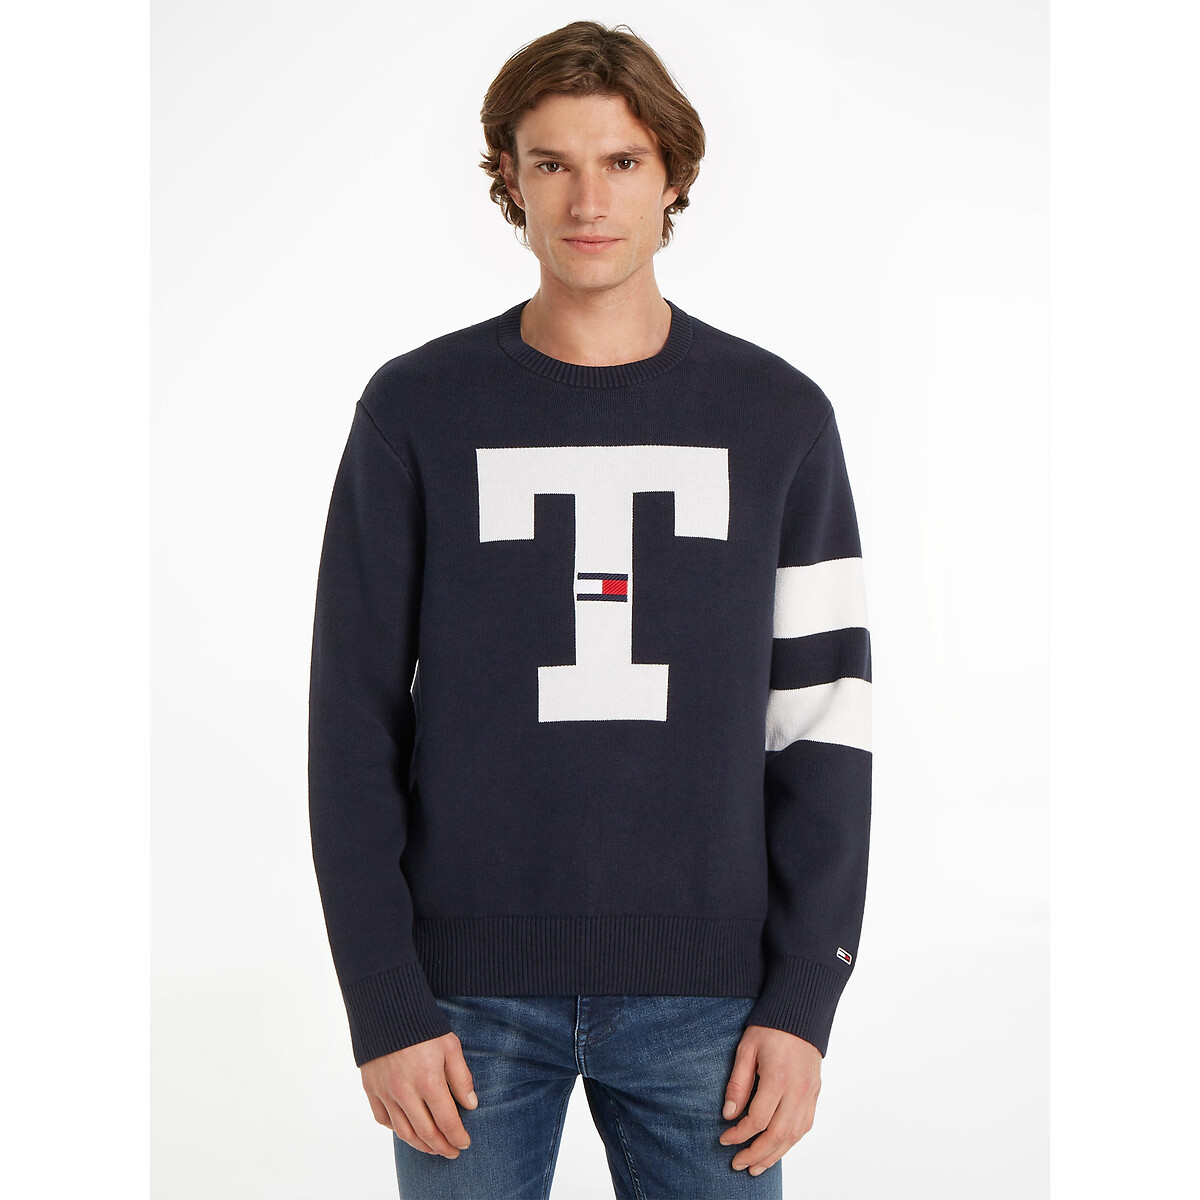 Image of Logo Print Cotton Jumper in Relaxed Fit with Crew Neck